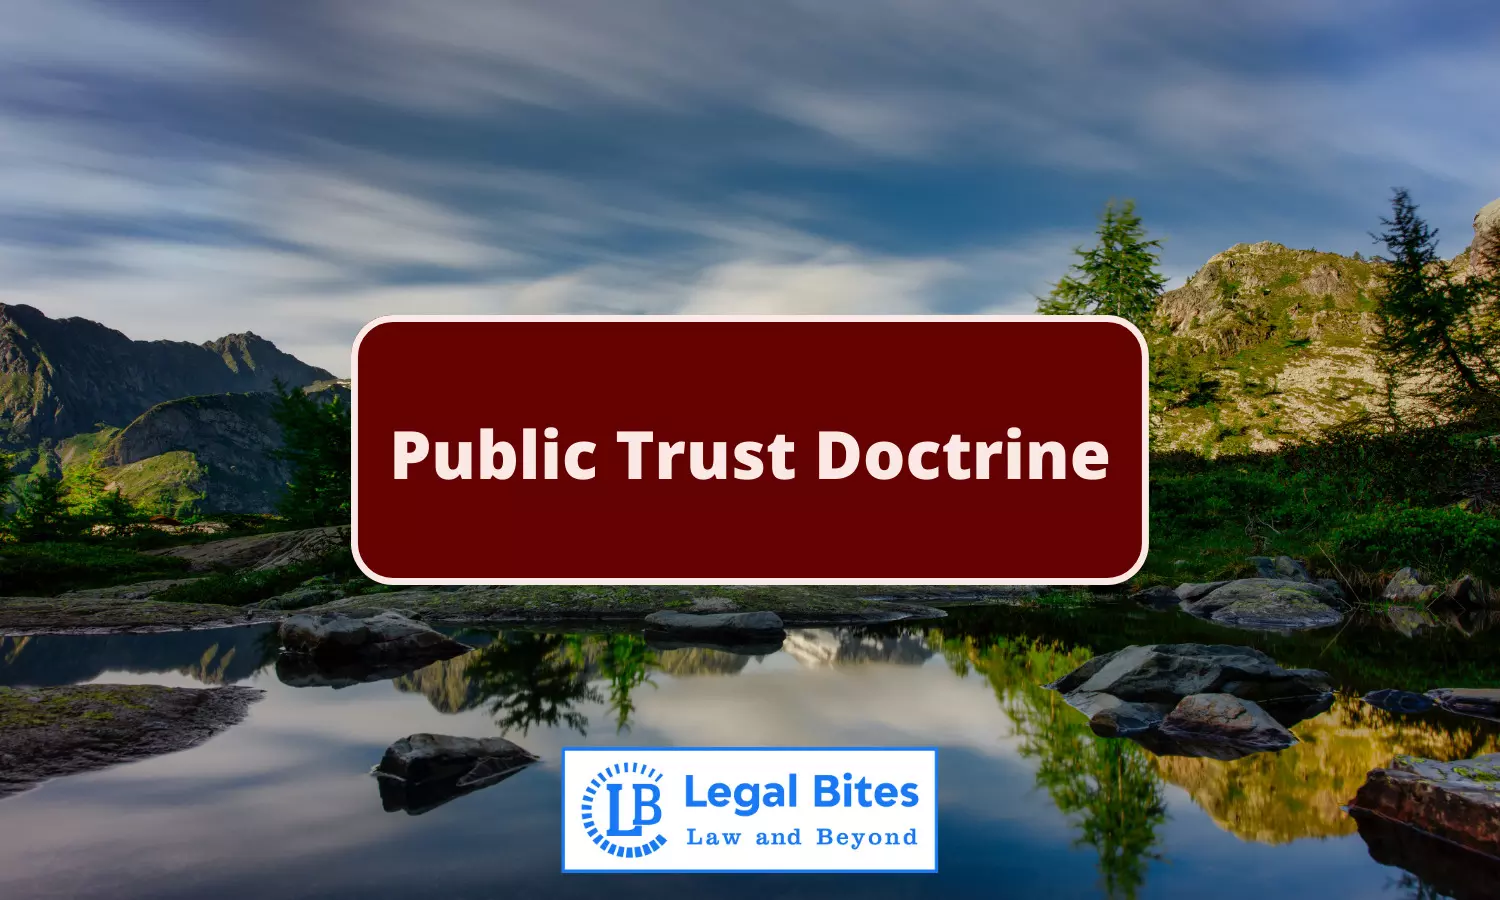 All You need to know about the Public Trust Doctrine